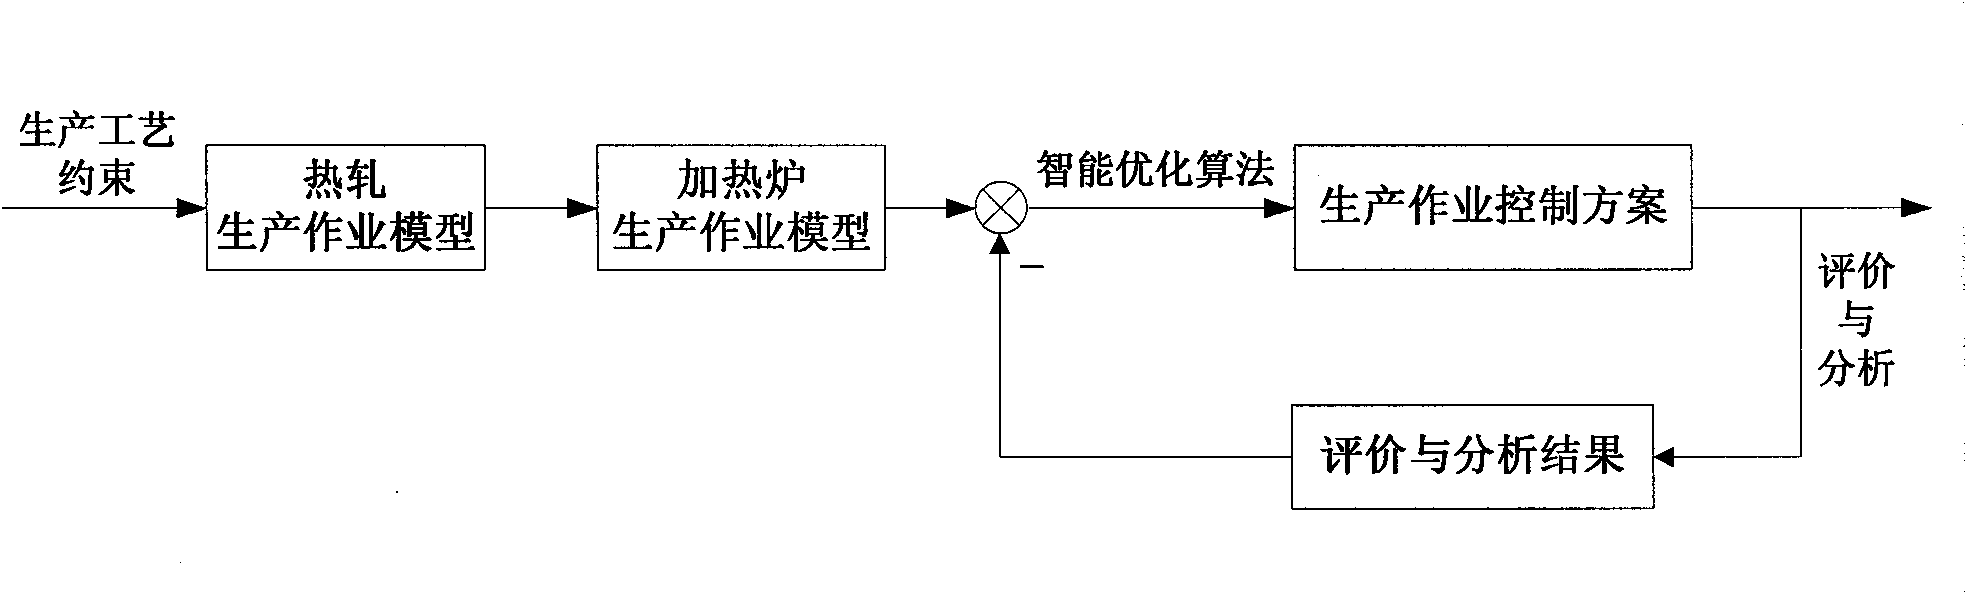 Integrated control method and device of production operations of heating furnace and hot rolling of iron and steel enterprise